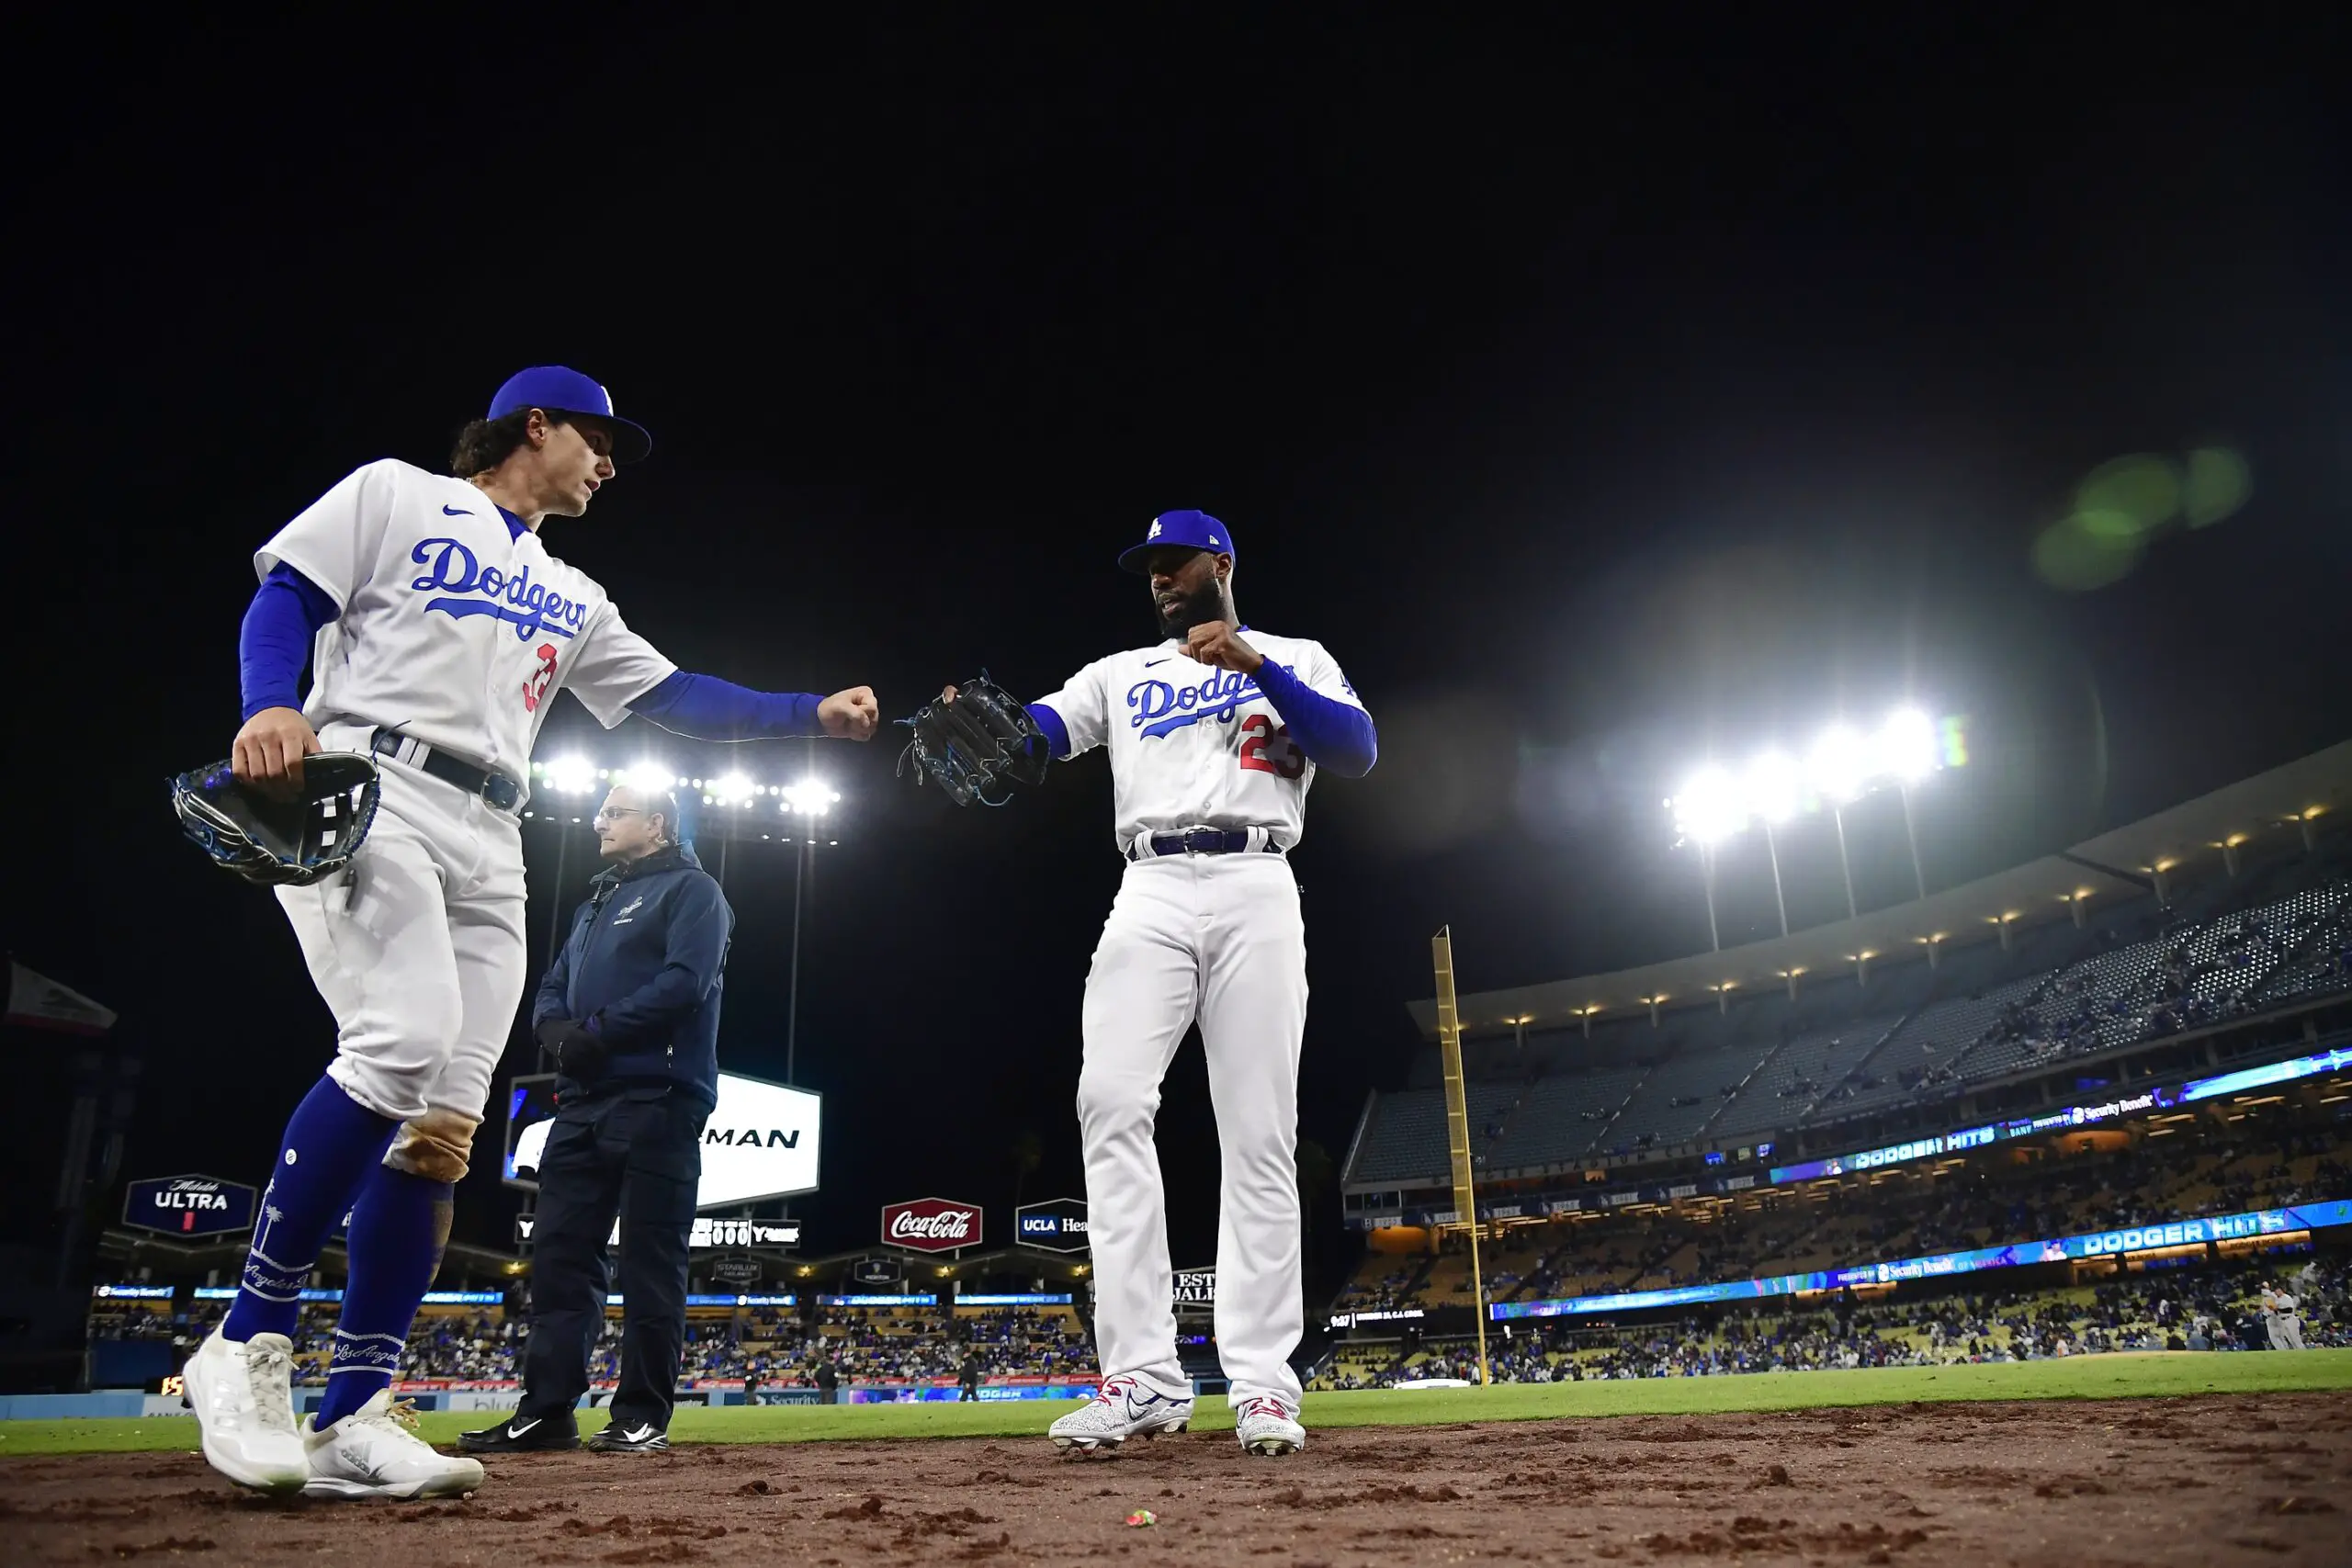 James Outman Connected to Dodgers Legend Yasiel Puig After Big Night